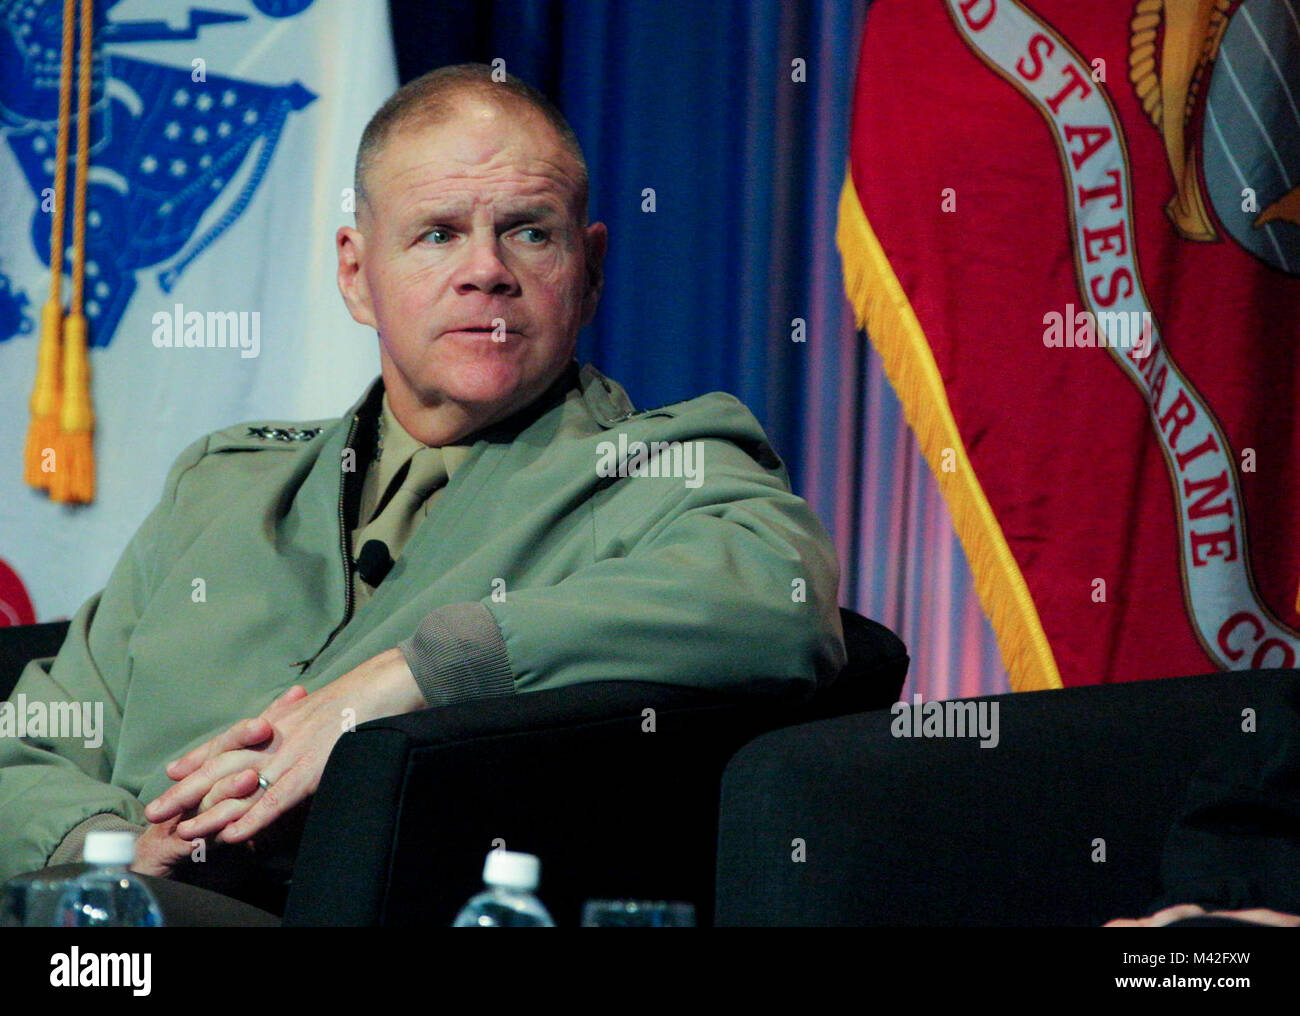 Commandant of the Marine Corps Gen. Robert B. Neller speaks to military service members and attendees at the Sea Service Chiefs Town Hall Luncheon at the San Diego Convention Center, San Diego, Calif., February 8, 2018. Neller spoke about the Marine Corps and answered questions from the audience. (U.S. Marine Corps Stock Photo